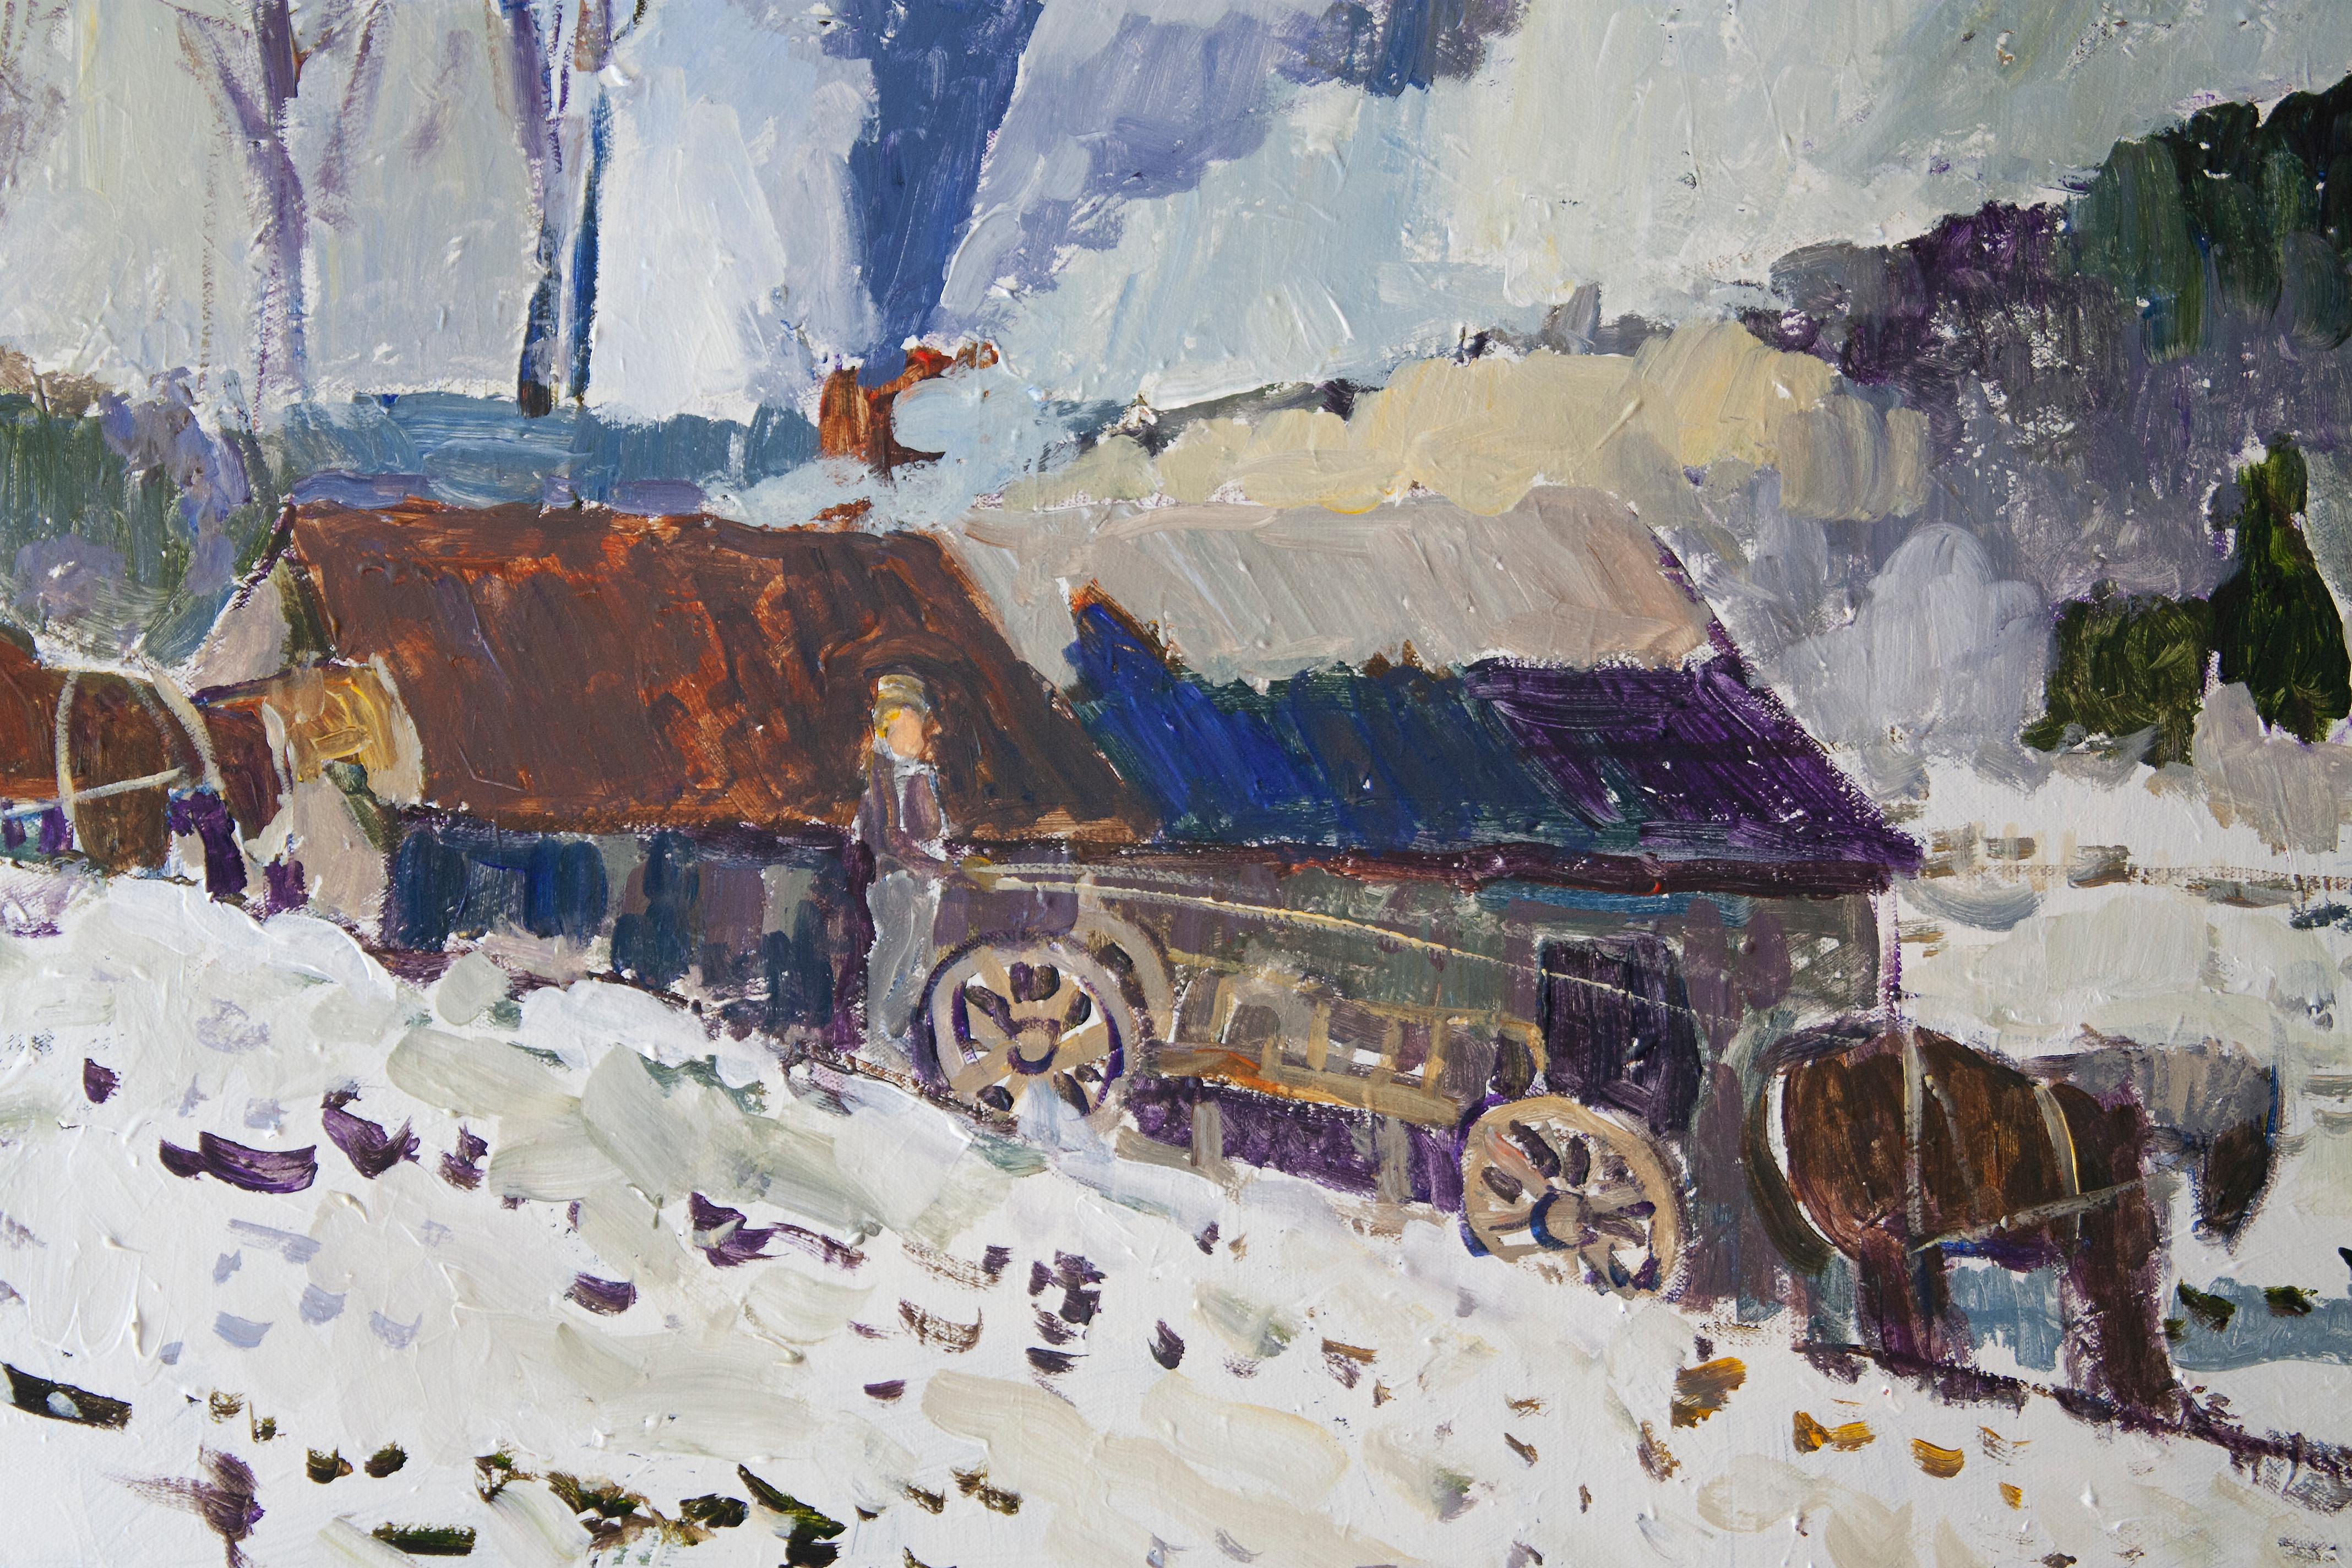 <p>Artist Comments<br />A cabin situated on a snow-covered mountainside emits smoke into a purple-tinted sky. With bold painterly strokes, artist Robert Hofherr creates movement amidst the calm. 